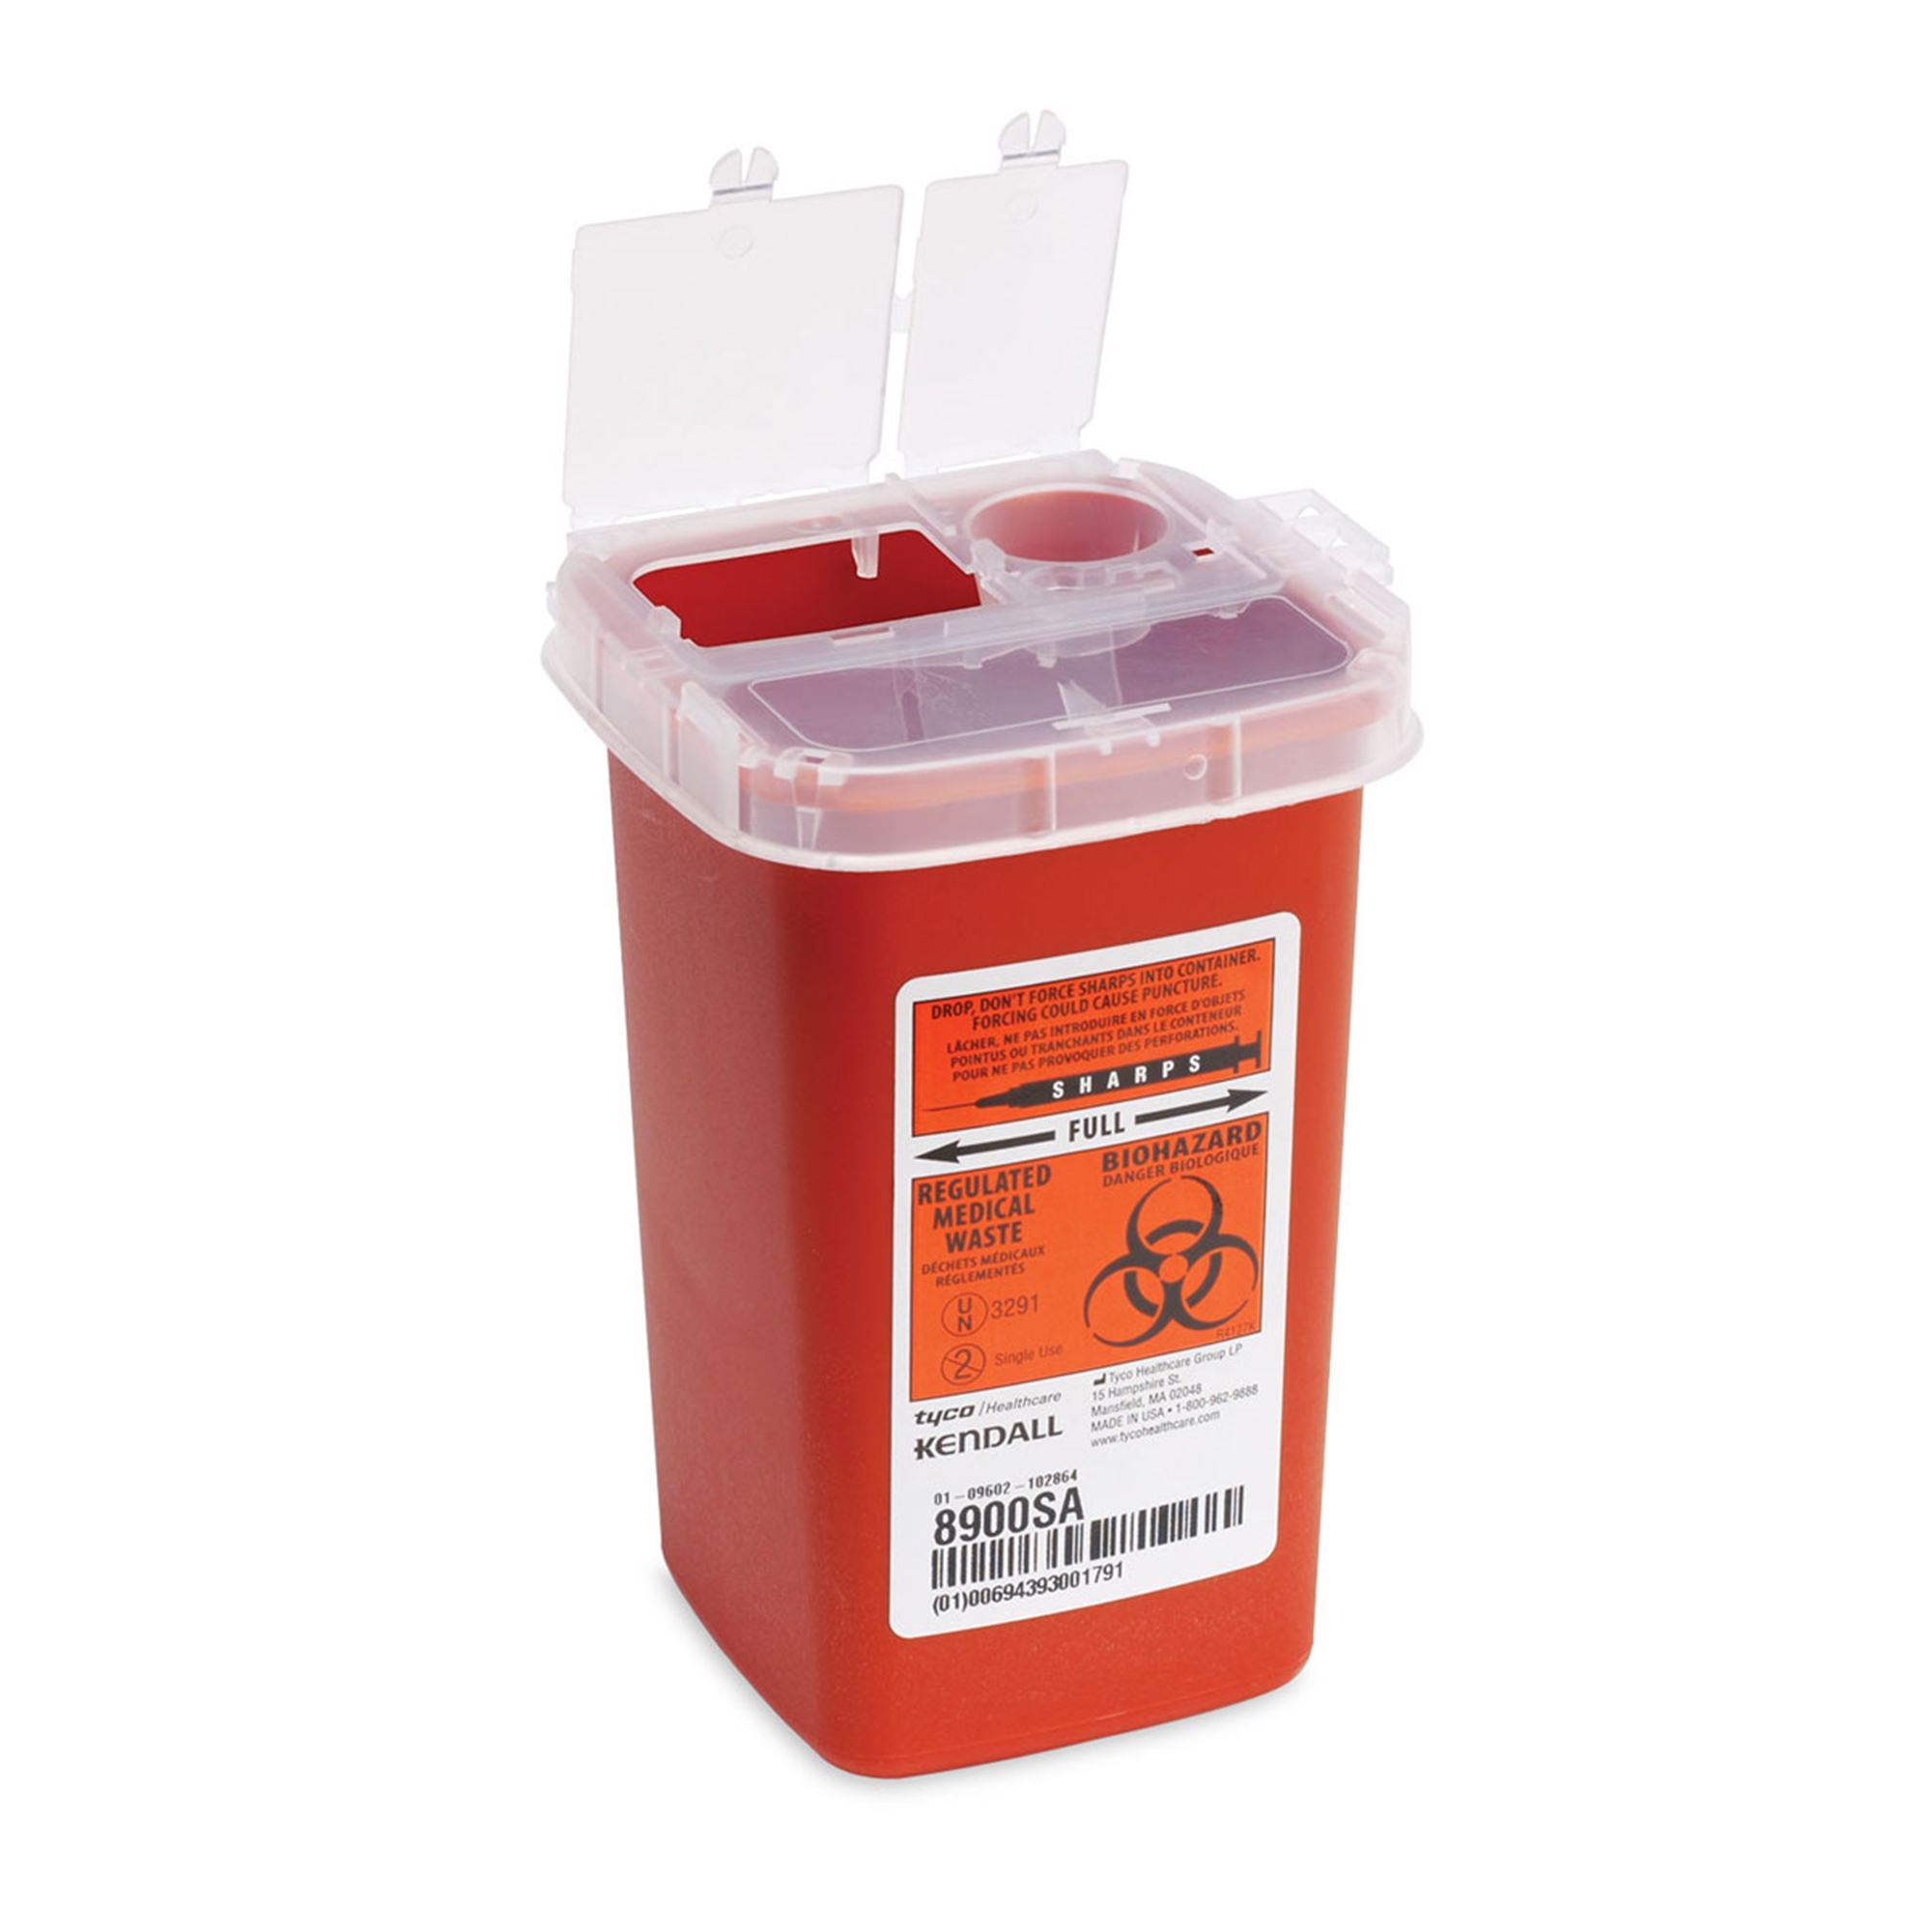 Kendall Phlebotomy Sharp Container 1Qt